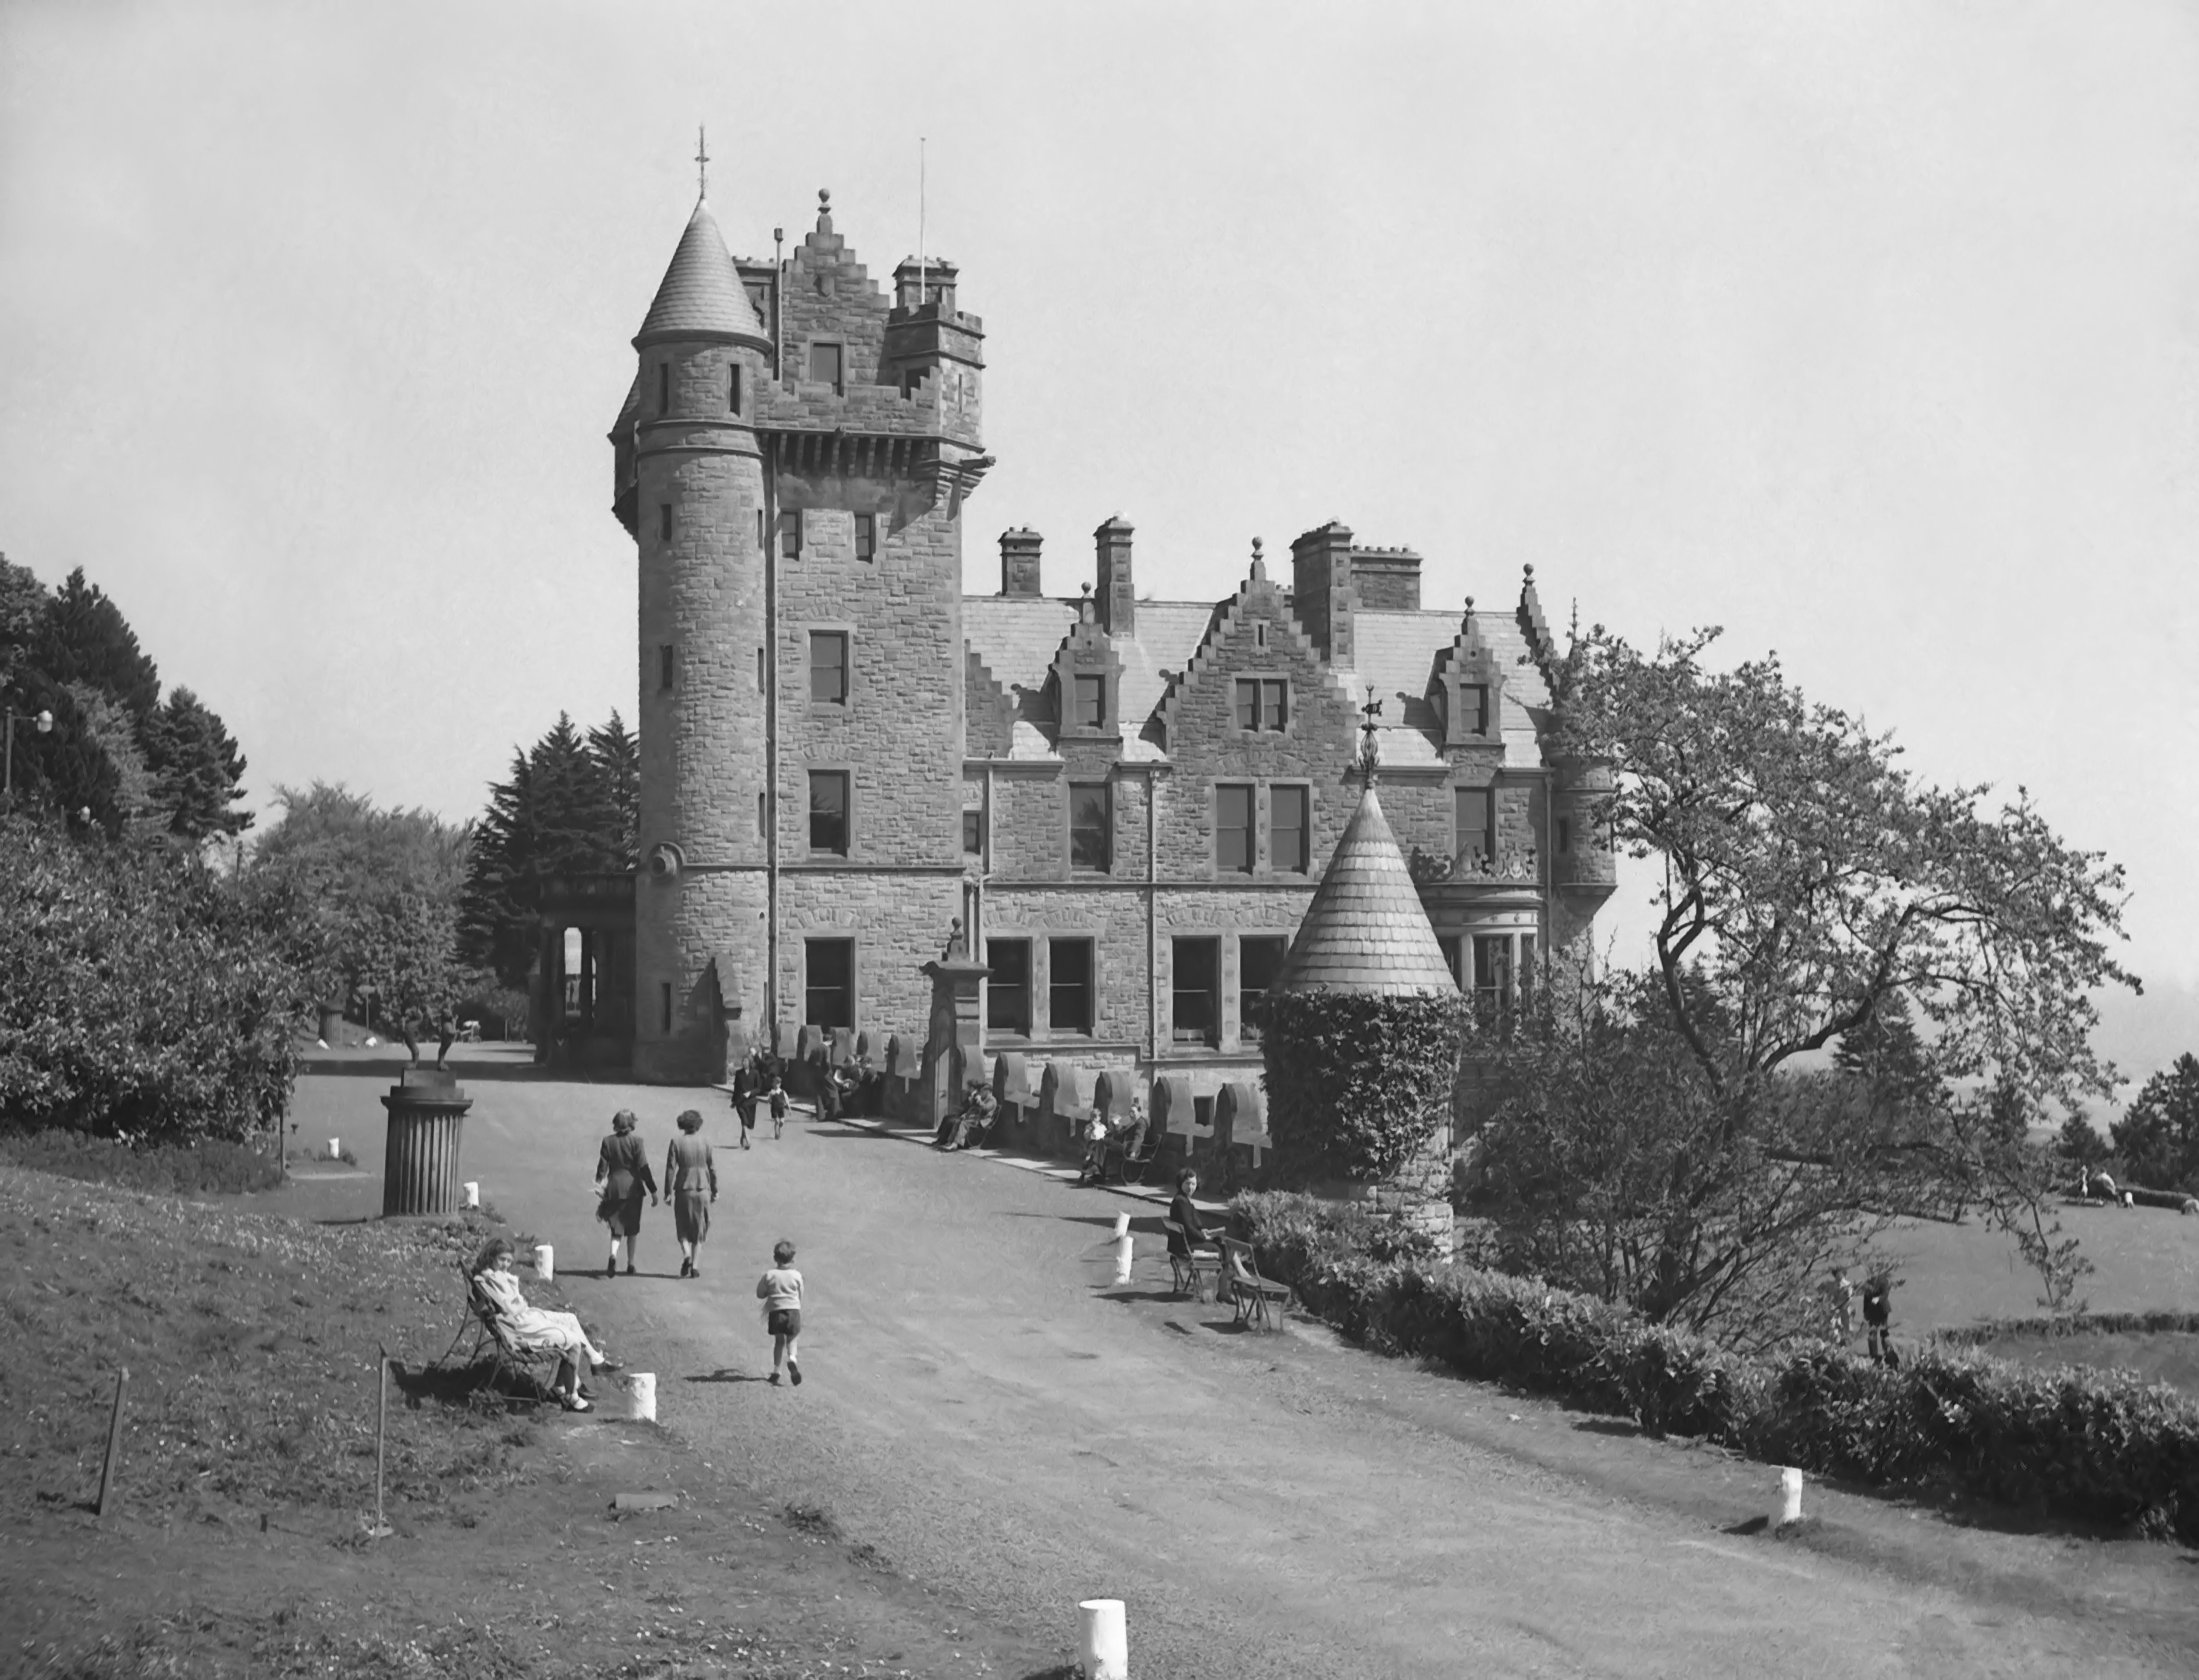 Belfast Castle and grounds. Copyright of Yesterdays Photos.